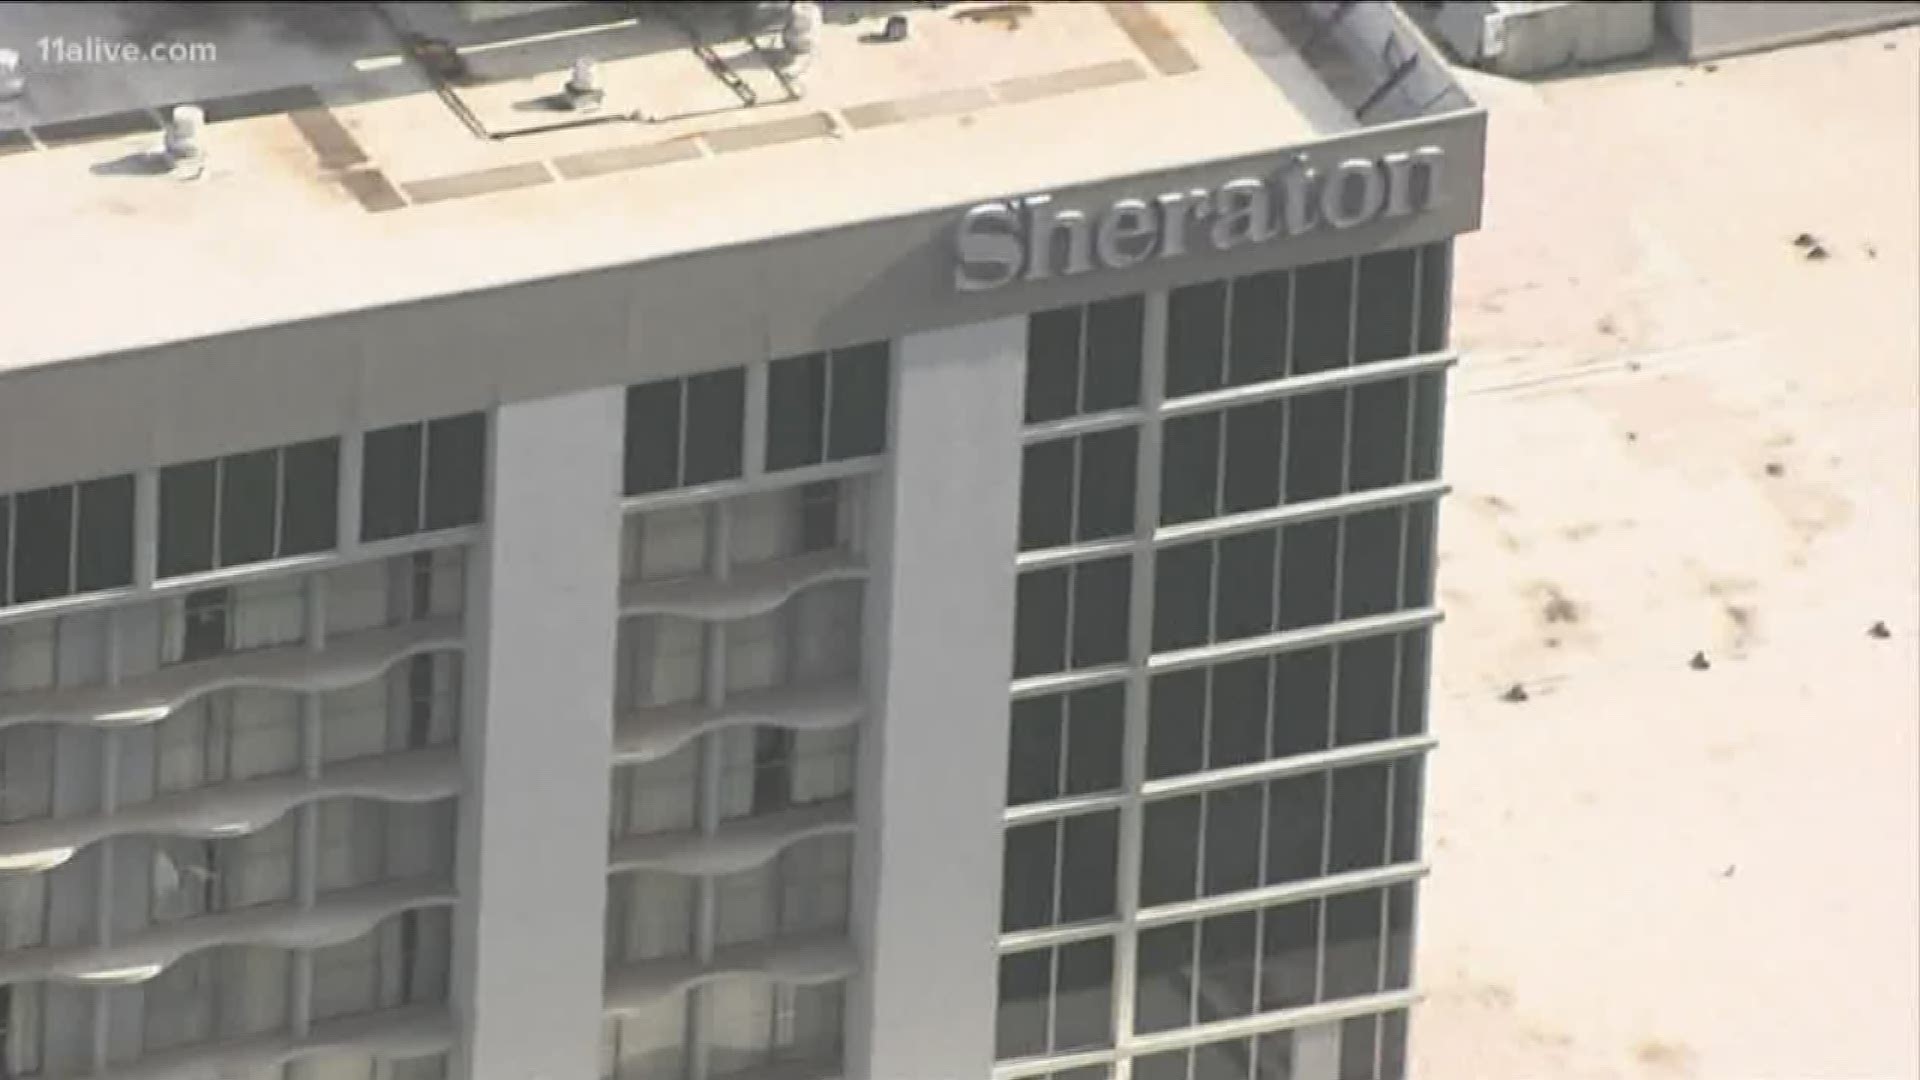 State officials said that shutting down the entire hotel is voluntary.